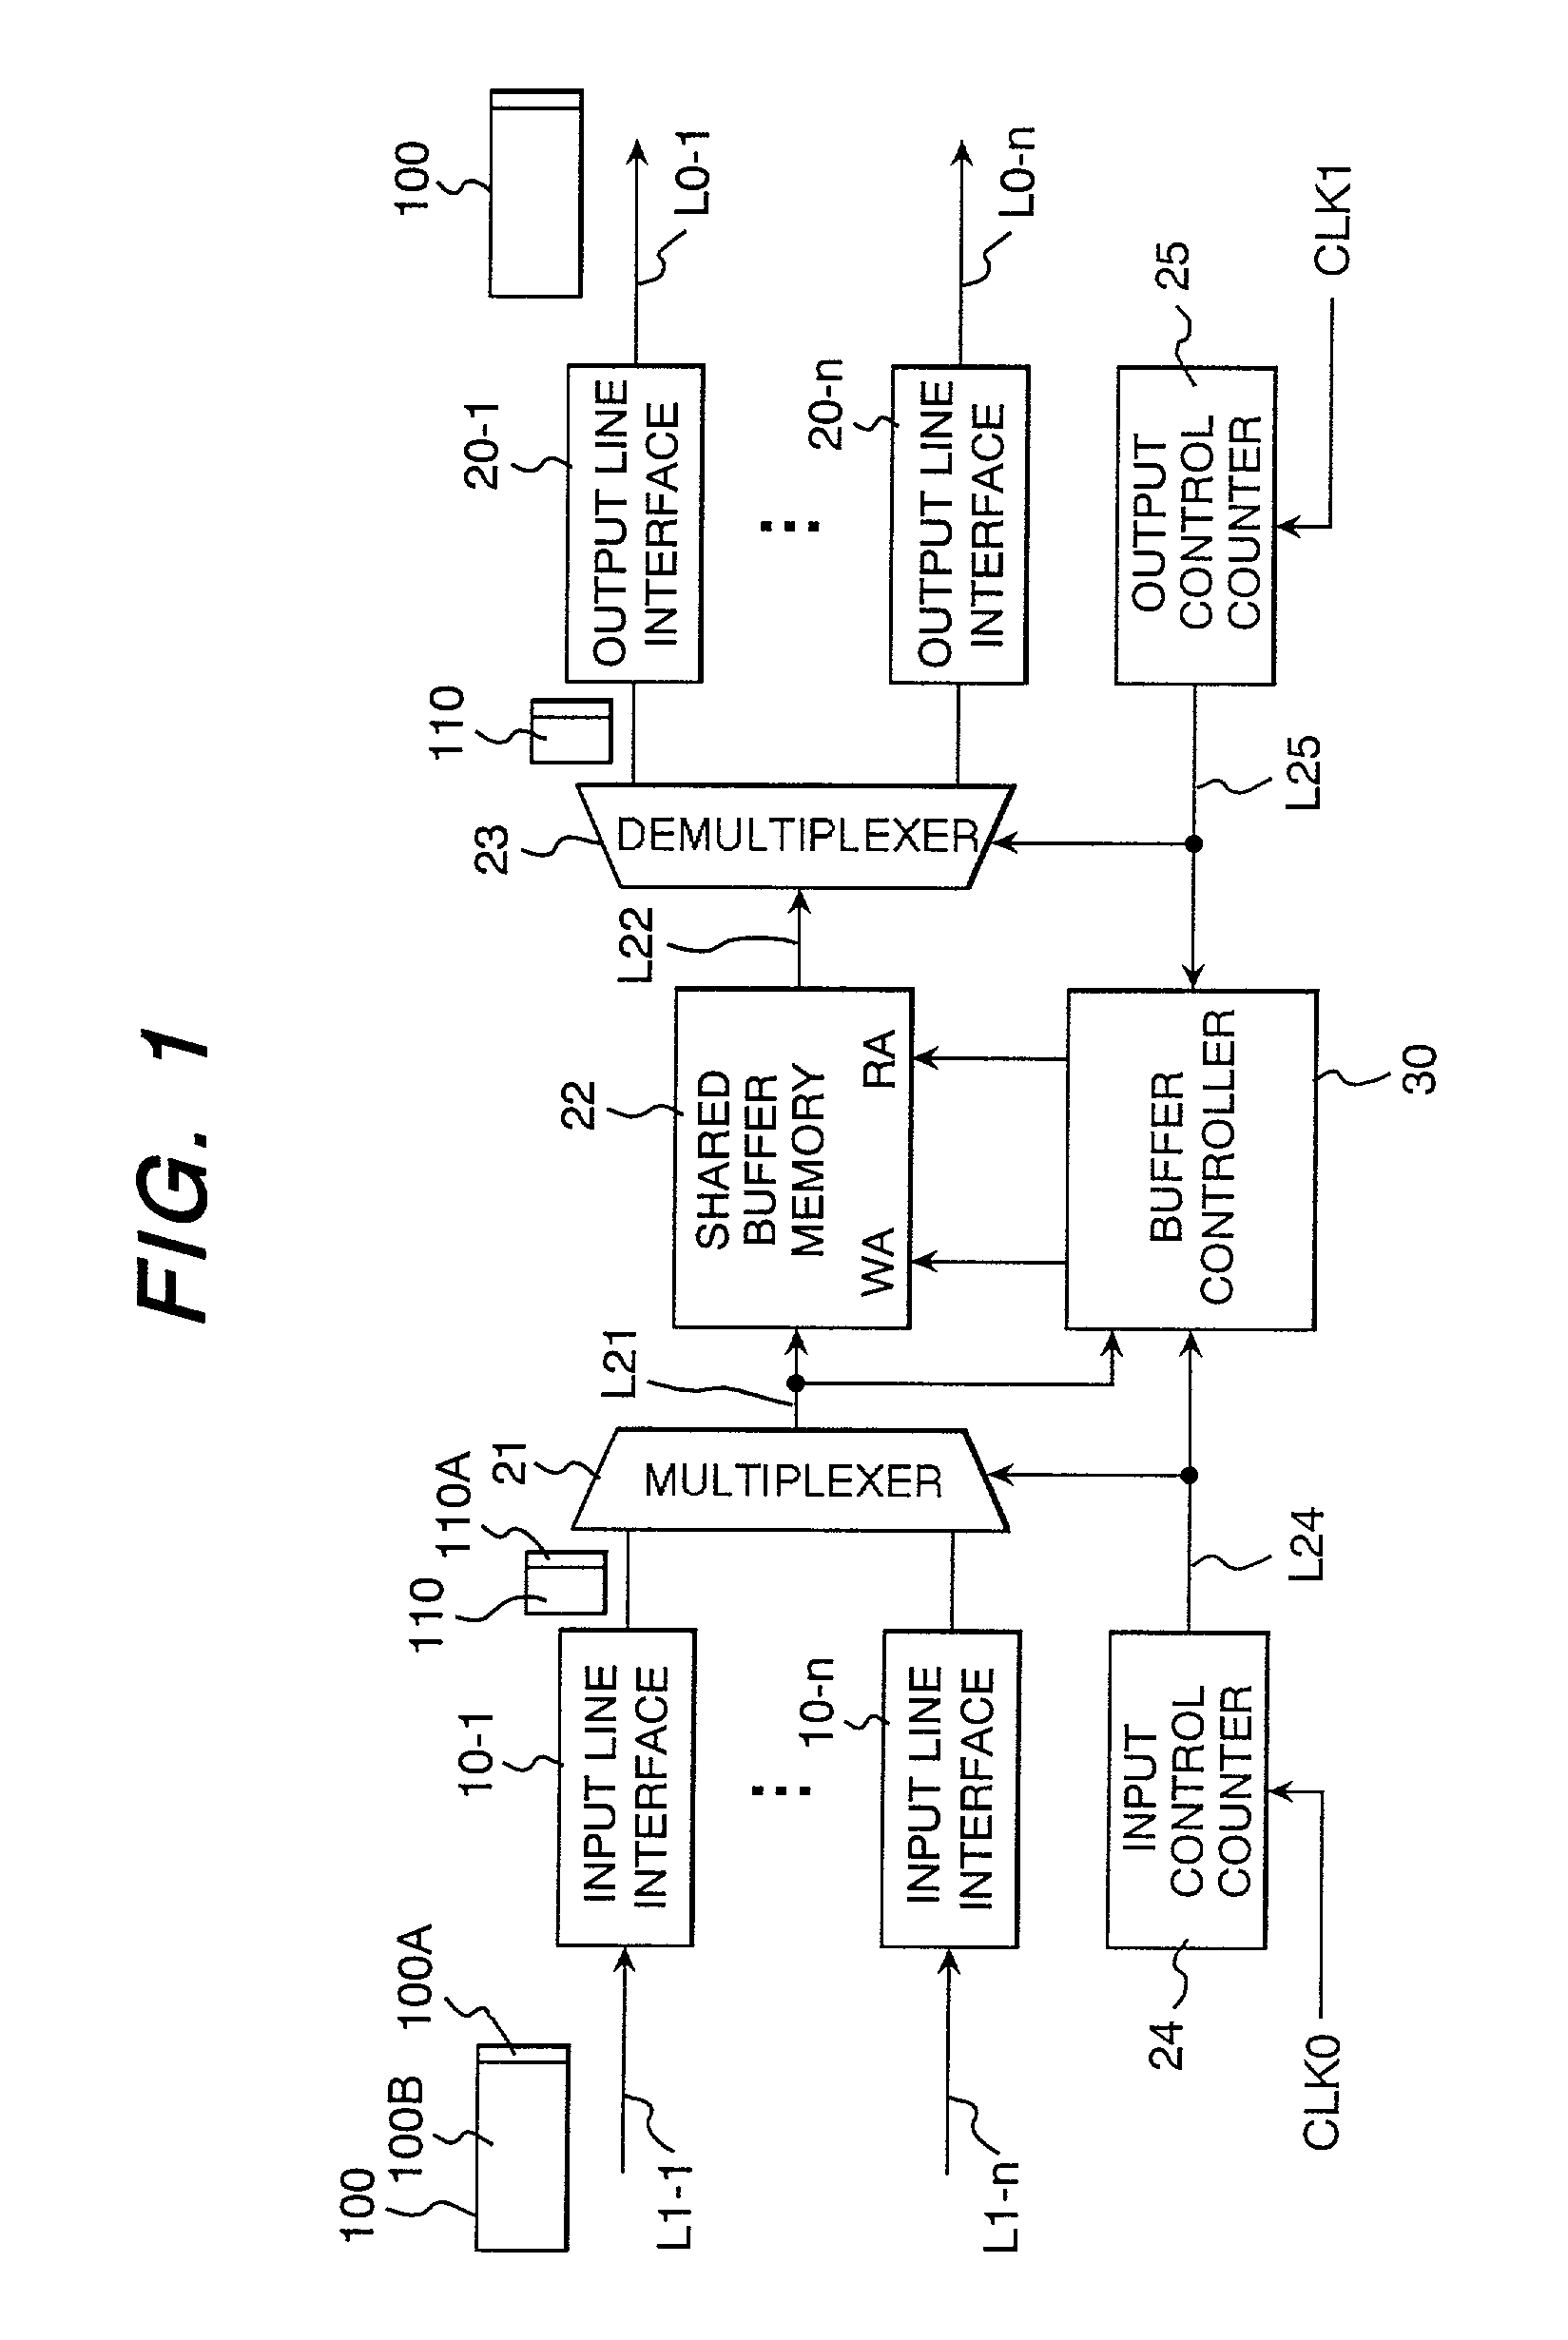 Shared buffer type variable length packet switch